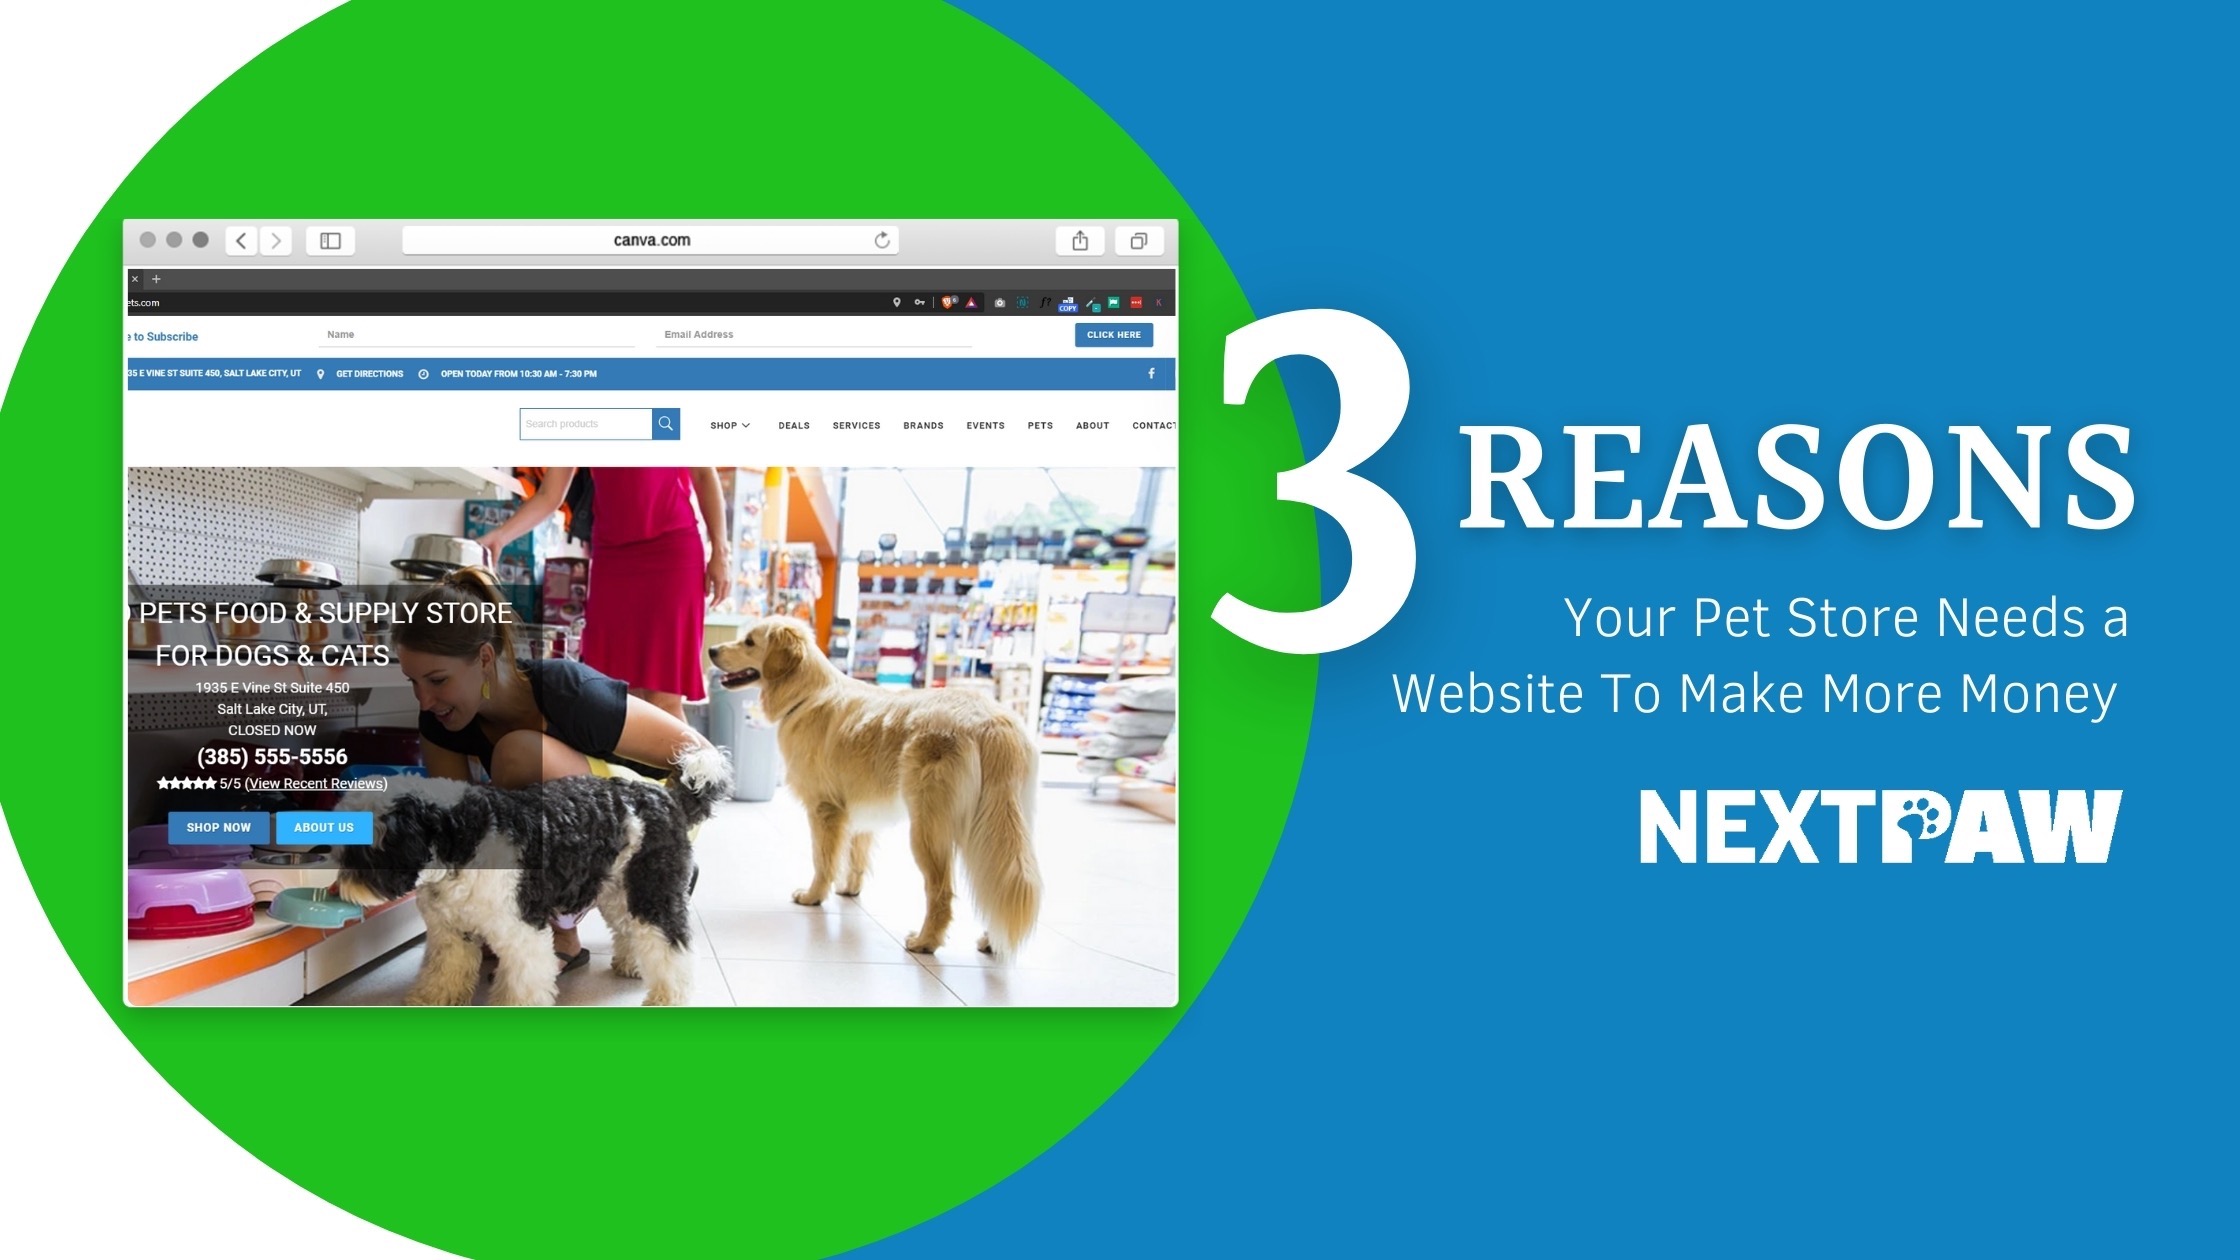 3 Reasons Why Your Pet Store Needs a Website To Make More Money